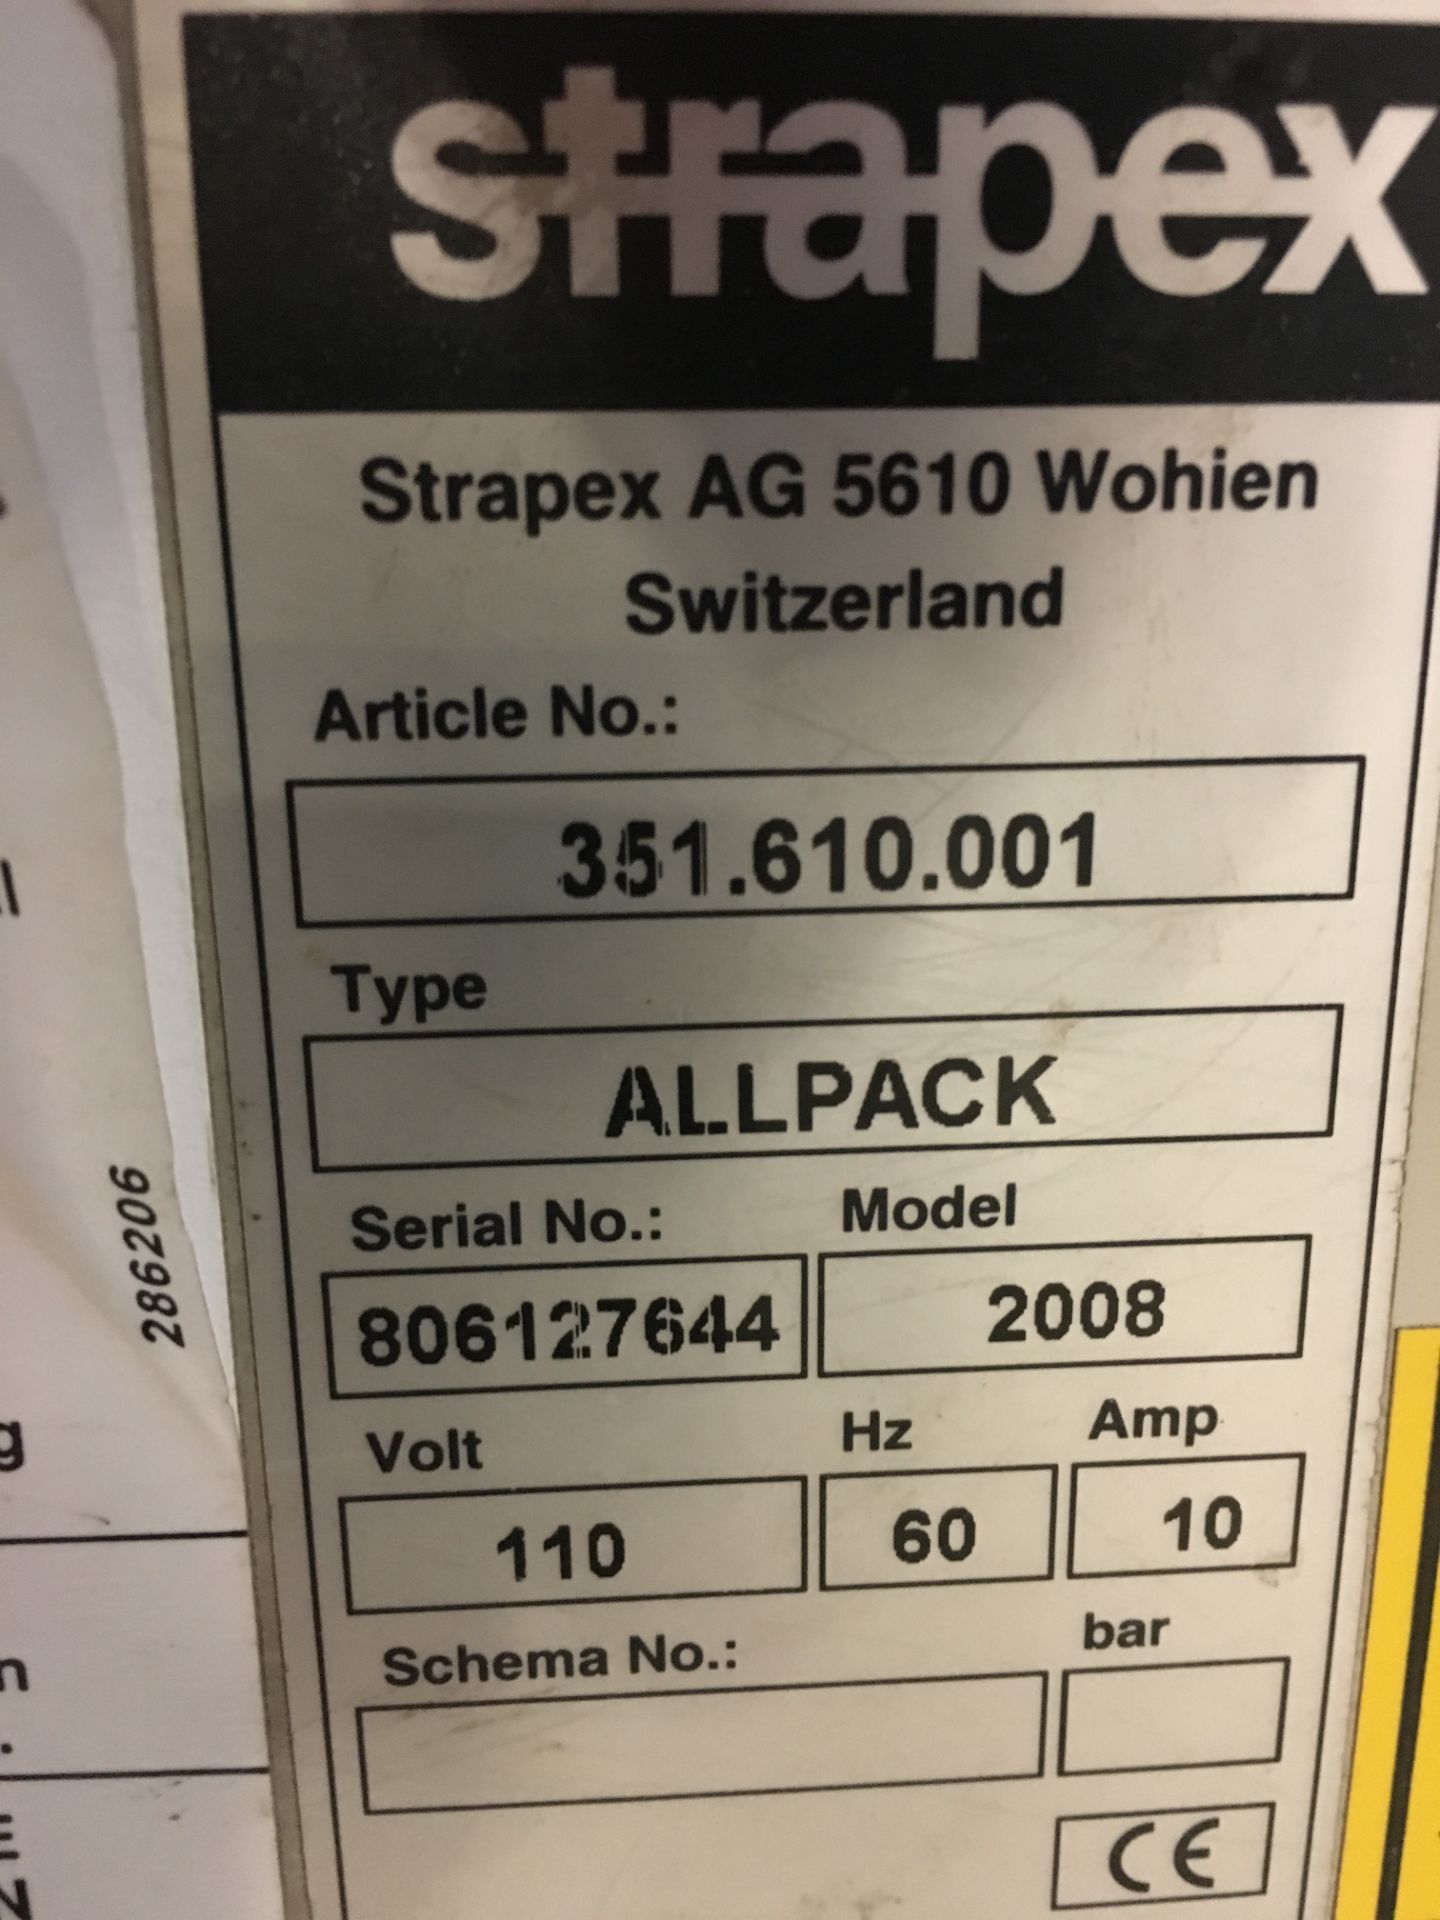 Strapex Model 2008 Automatic Bander - Image 2 of 2